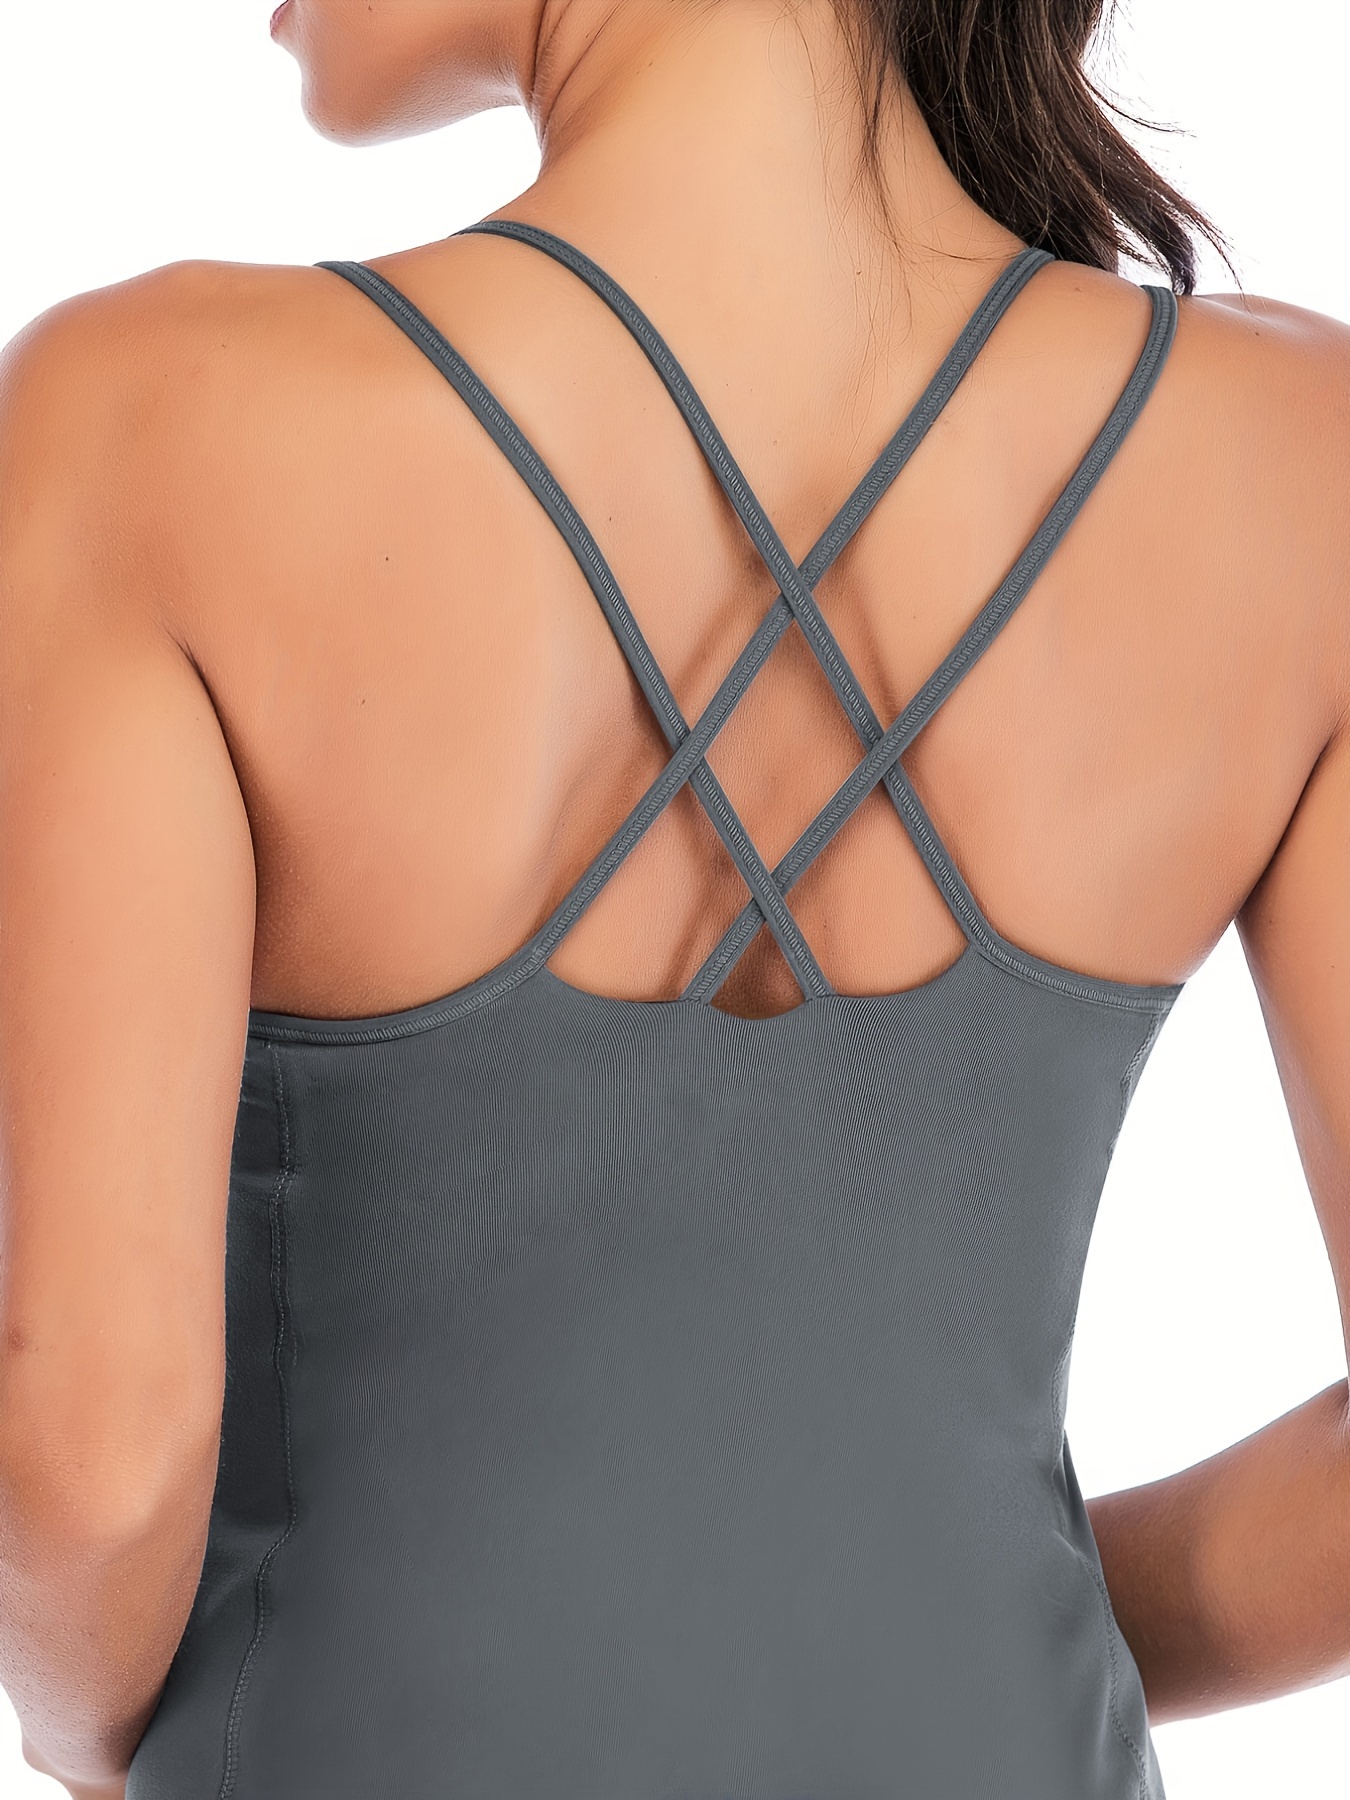 Women's Workout Tank Tops with Built in Bra Athletic Camisole Strappy Back Yoga  Tanks 